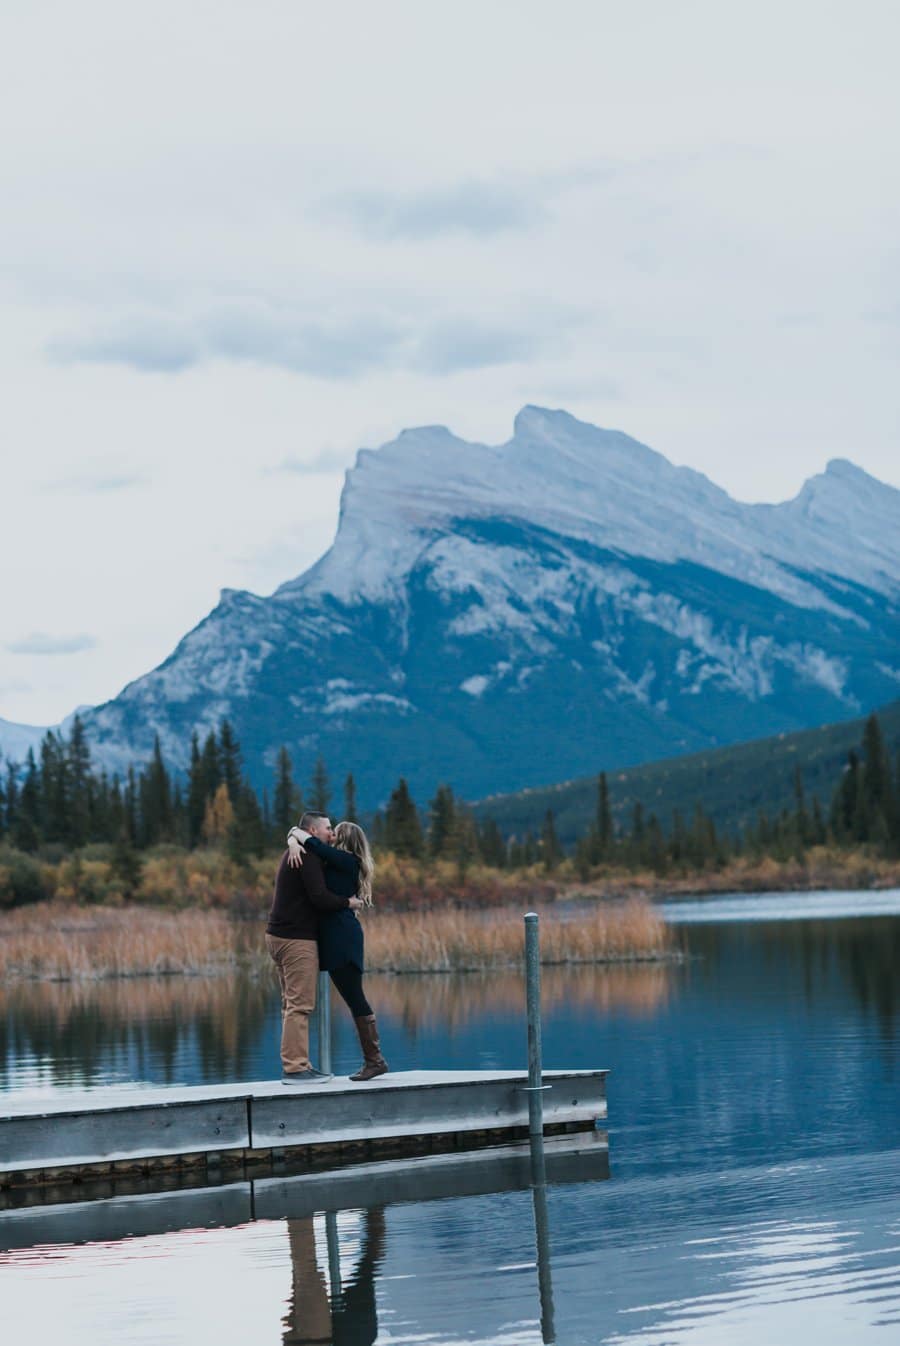 Banff Surprise Proposal Photography at Vermilion Lakes at blue hour. She said yes!